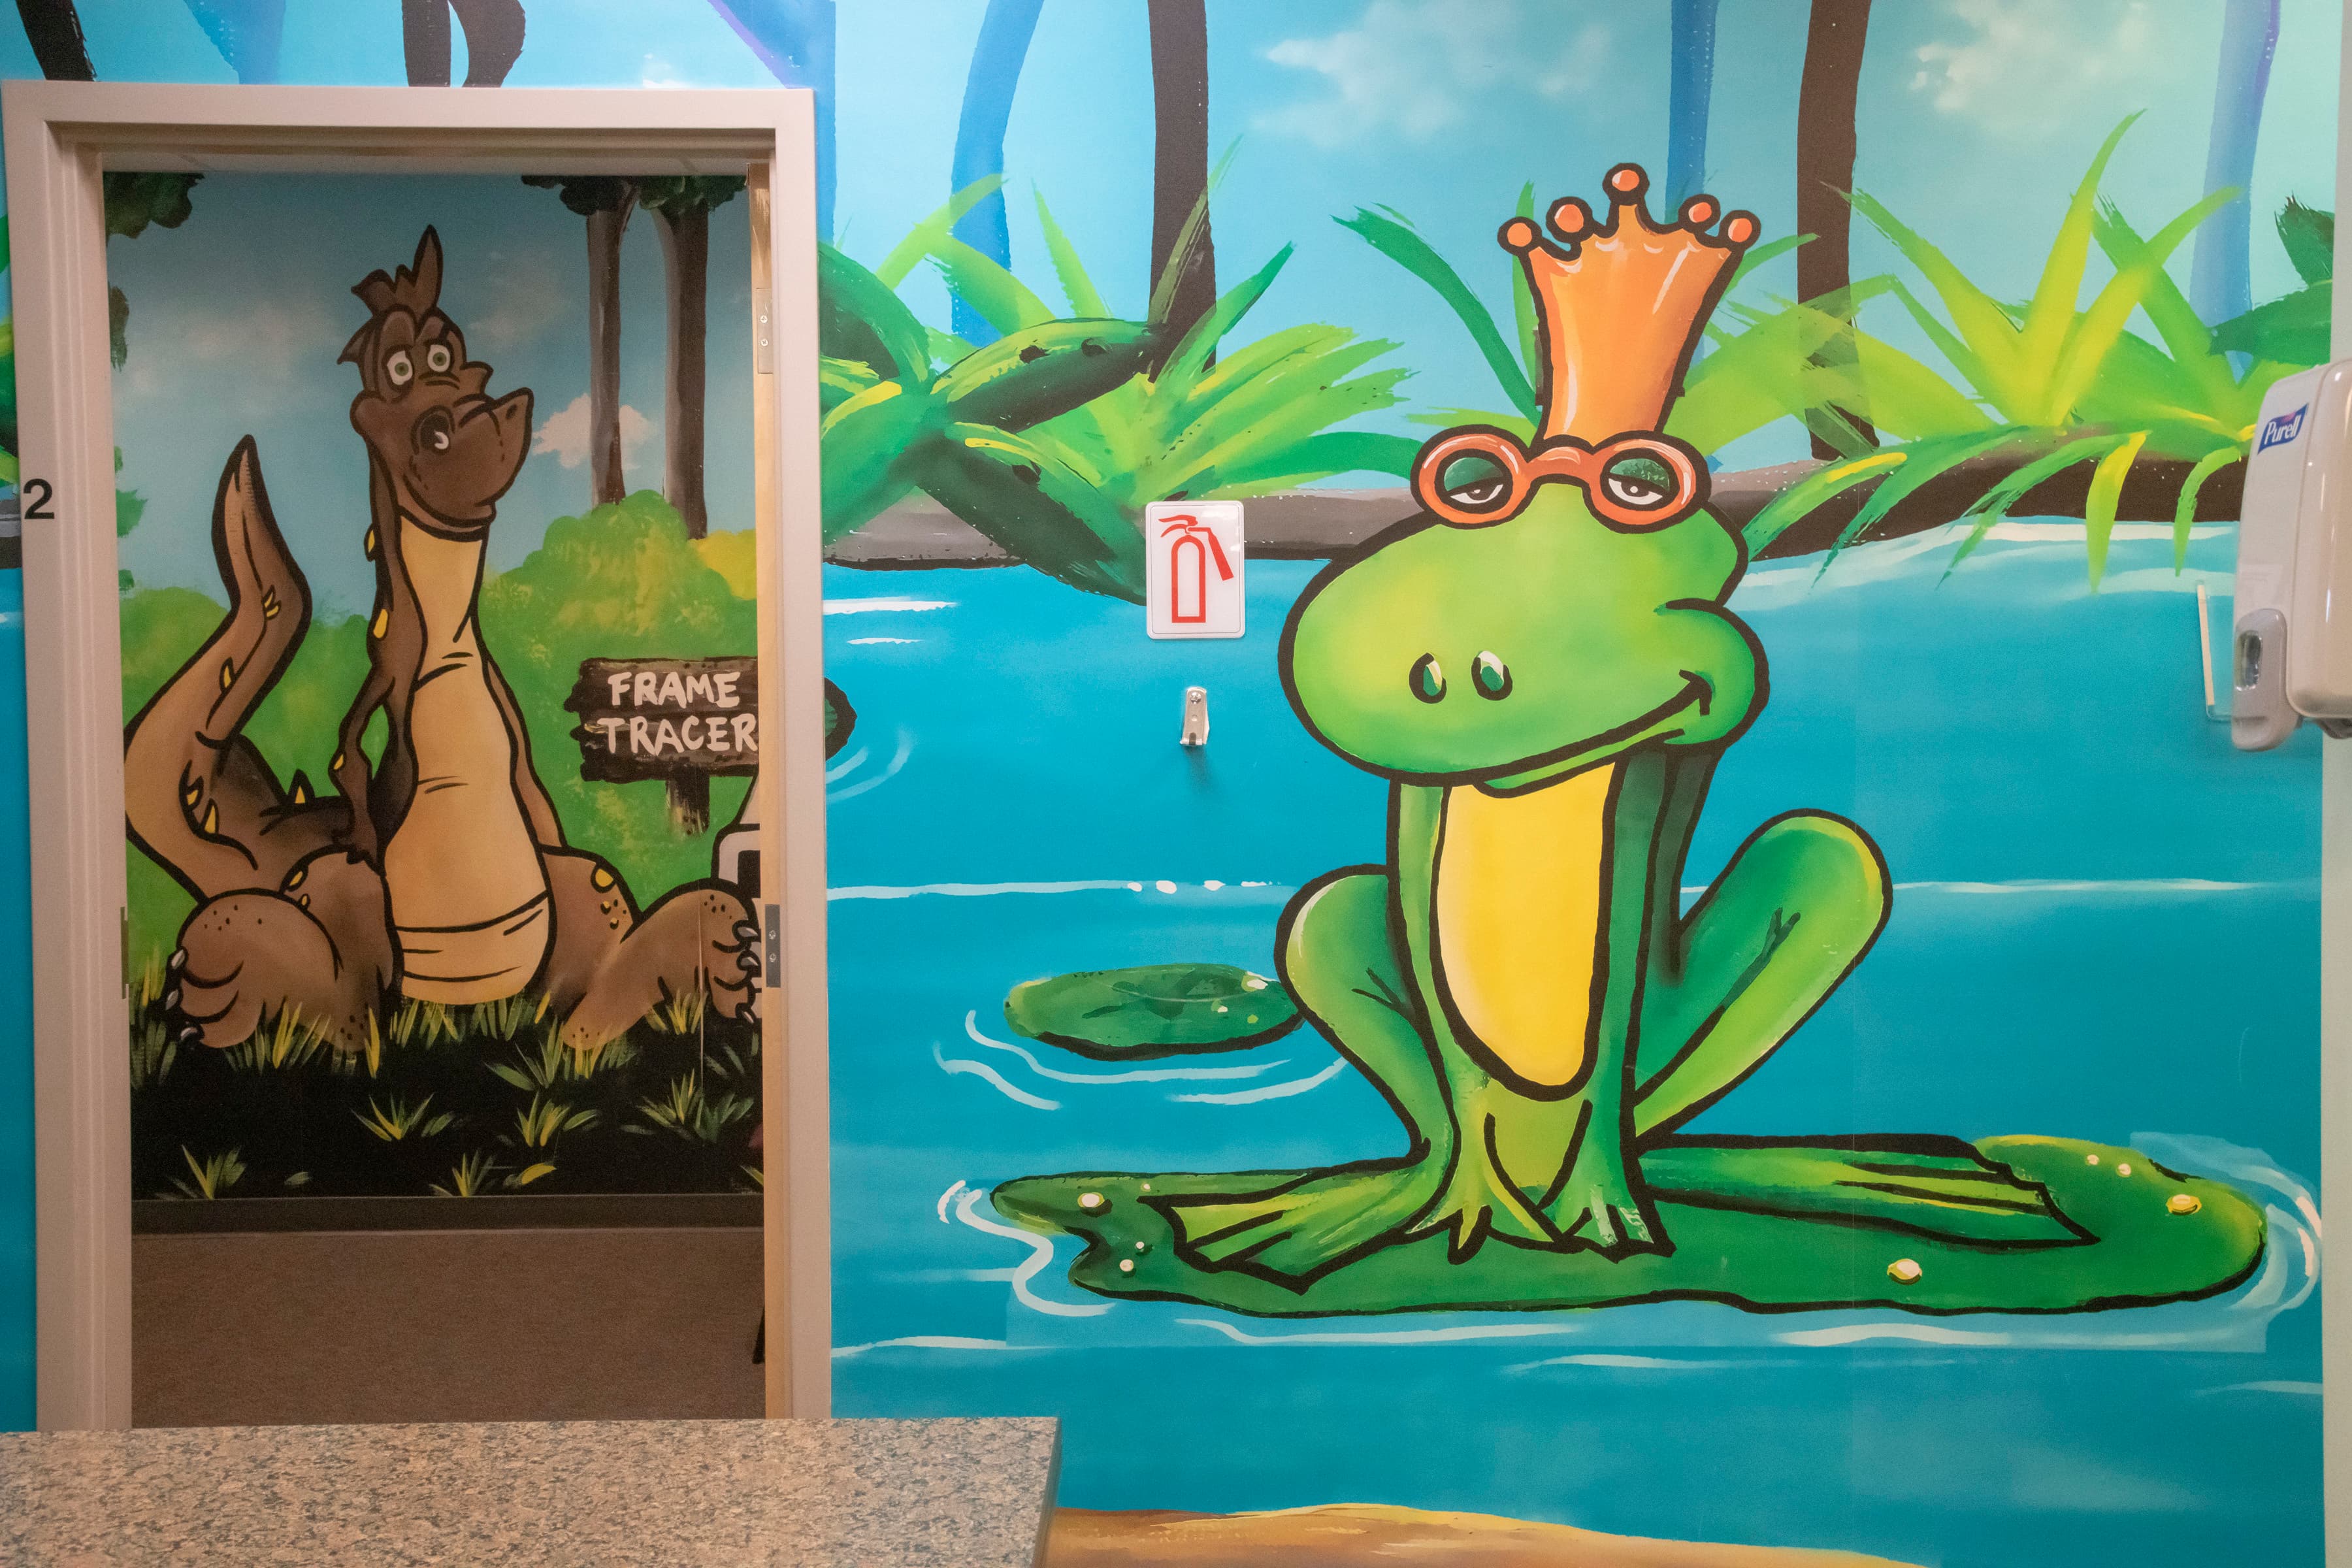 a frog wearing glasses and a crown and a dinosaur painting on the wall in the background